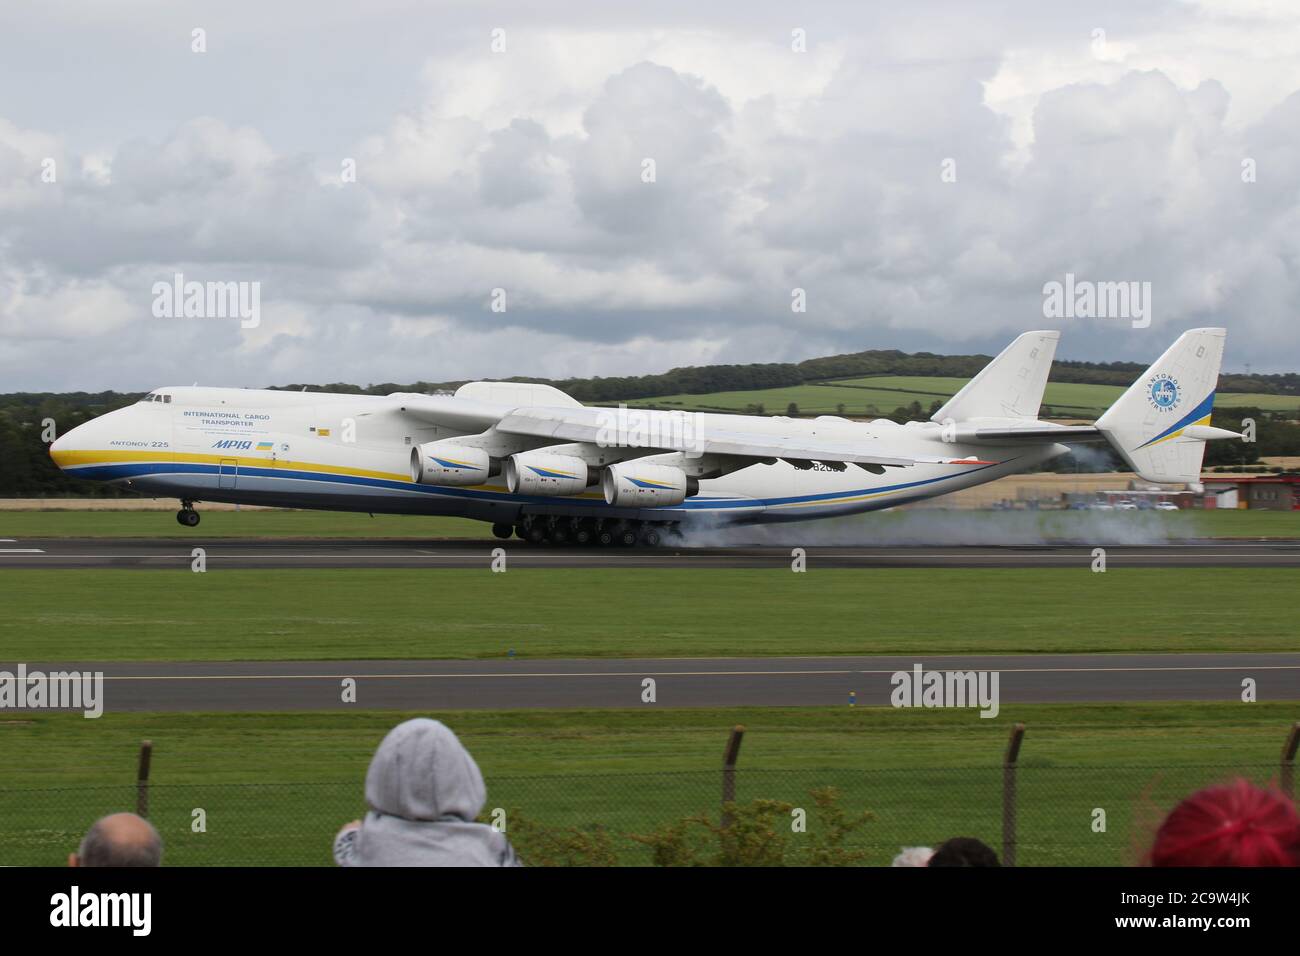 The largest plane in the world, the Antonov An-225 Mriya, stops off for refuelling at Prestwick International Airport in Ayrshire, Scotland. The aircraft, currently the only one of its kind completed, was initially built to transport the Buran space shuttle, and then served in the Soviet military as a strategic airlifter. It is now operated by Antonov Airlines to transport oversized loads, and today's visit was a scheduled fuel stop after departing Bangor earlier this morning. It then left Prestwick to continue its journey to Chateauroux in France. Stock Photo